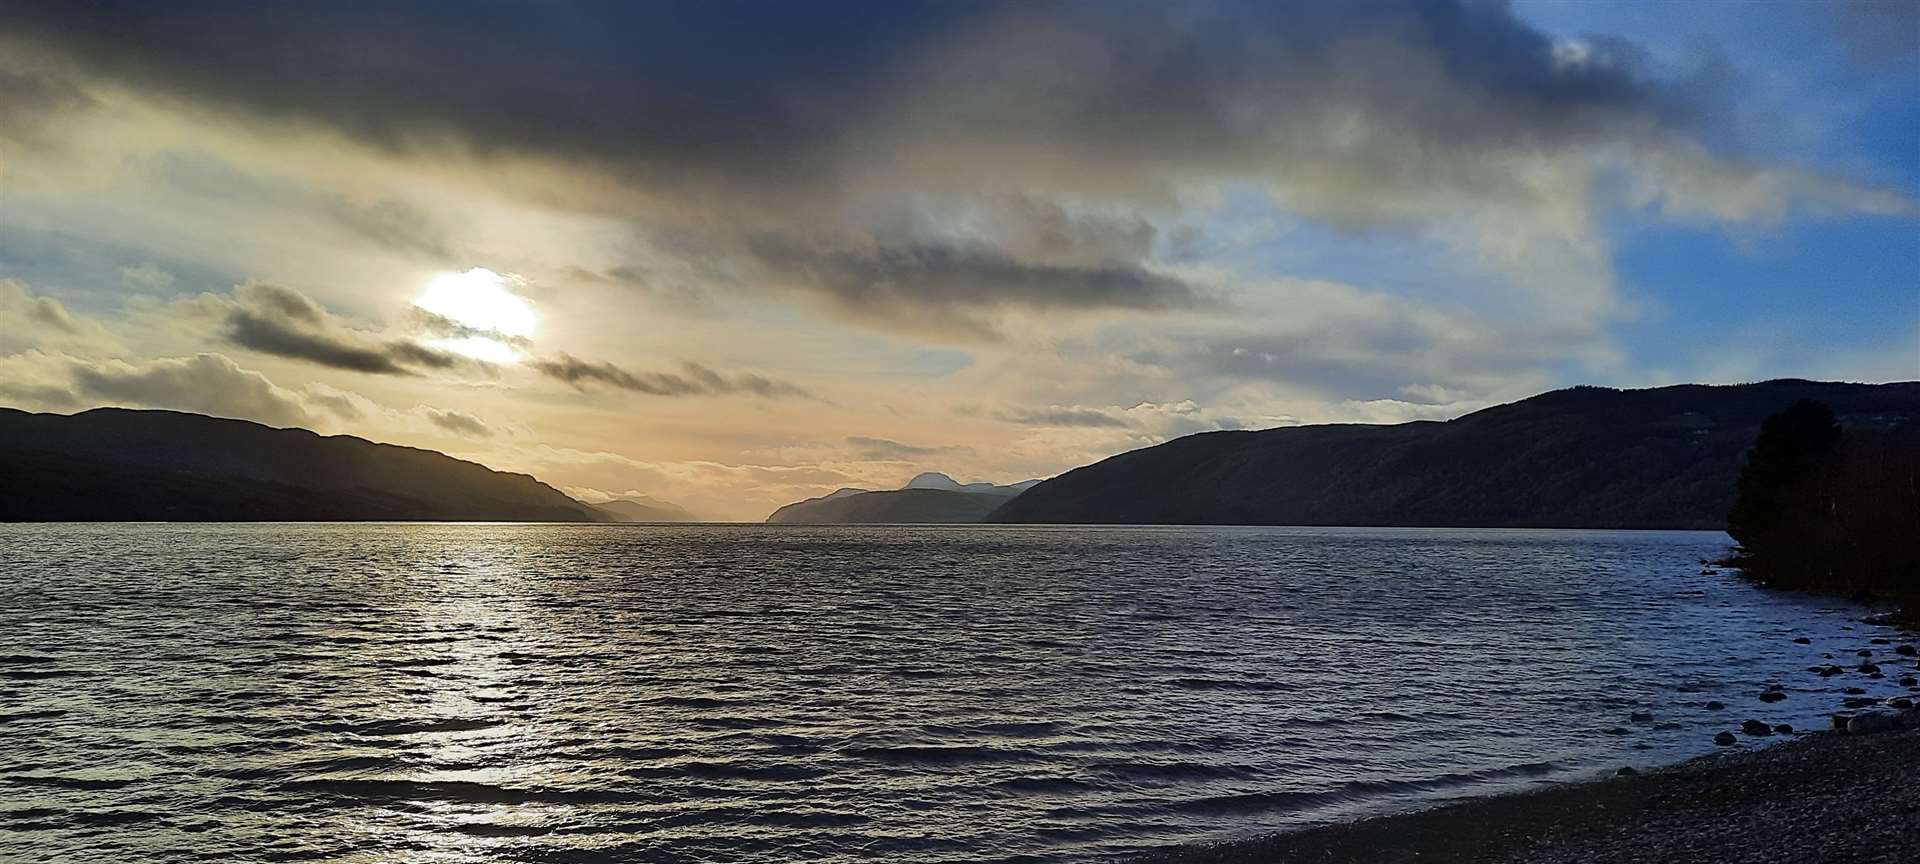 The view down Loch Ness from Dores.